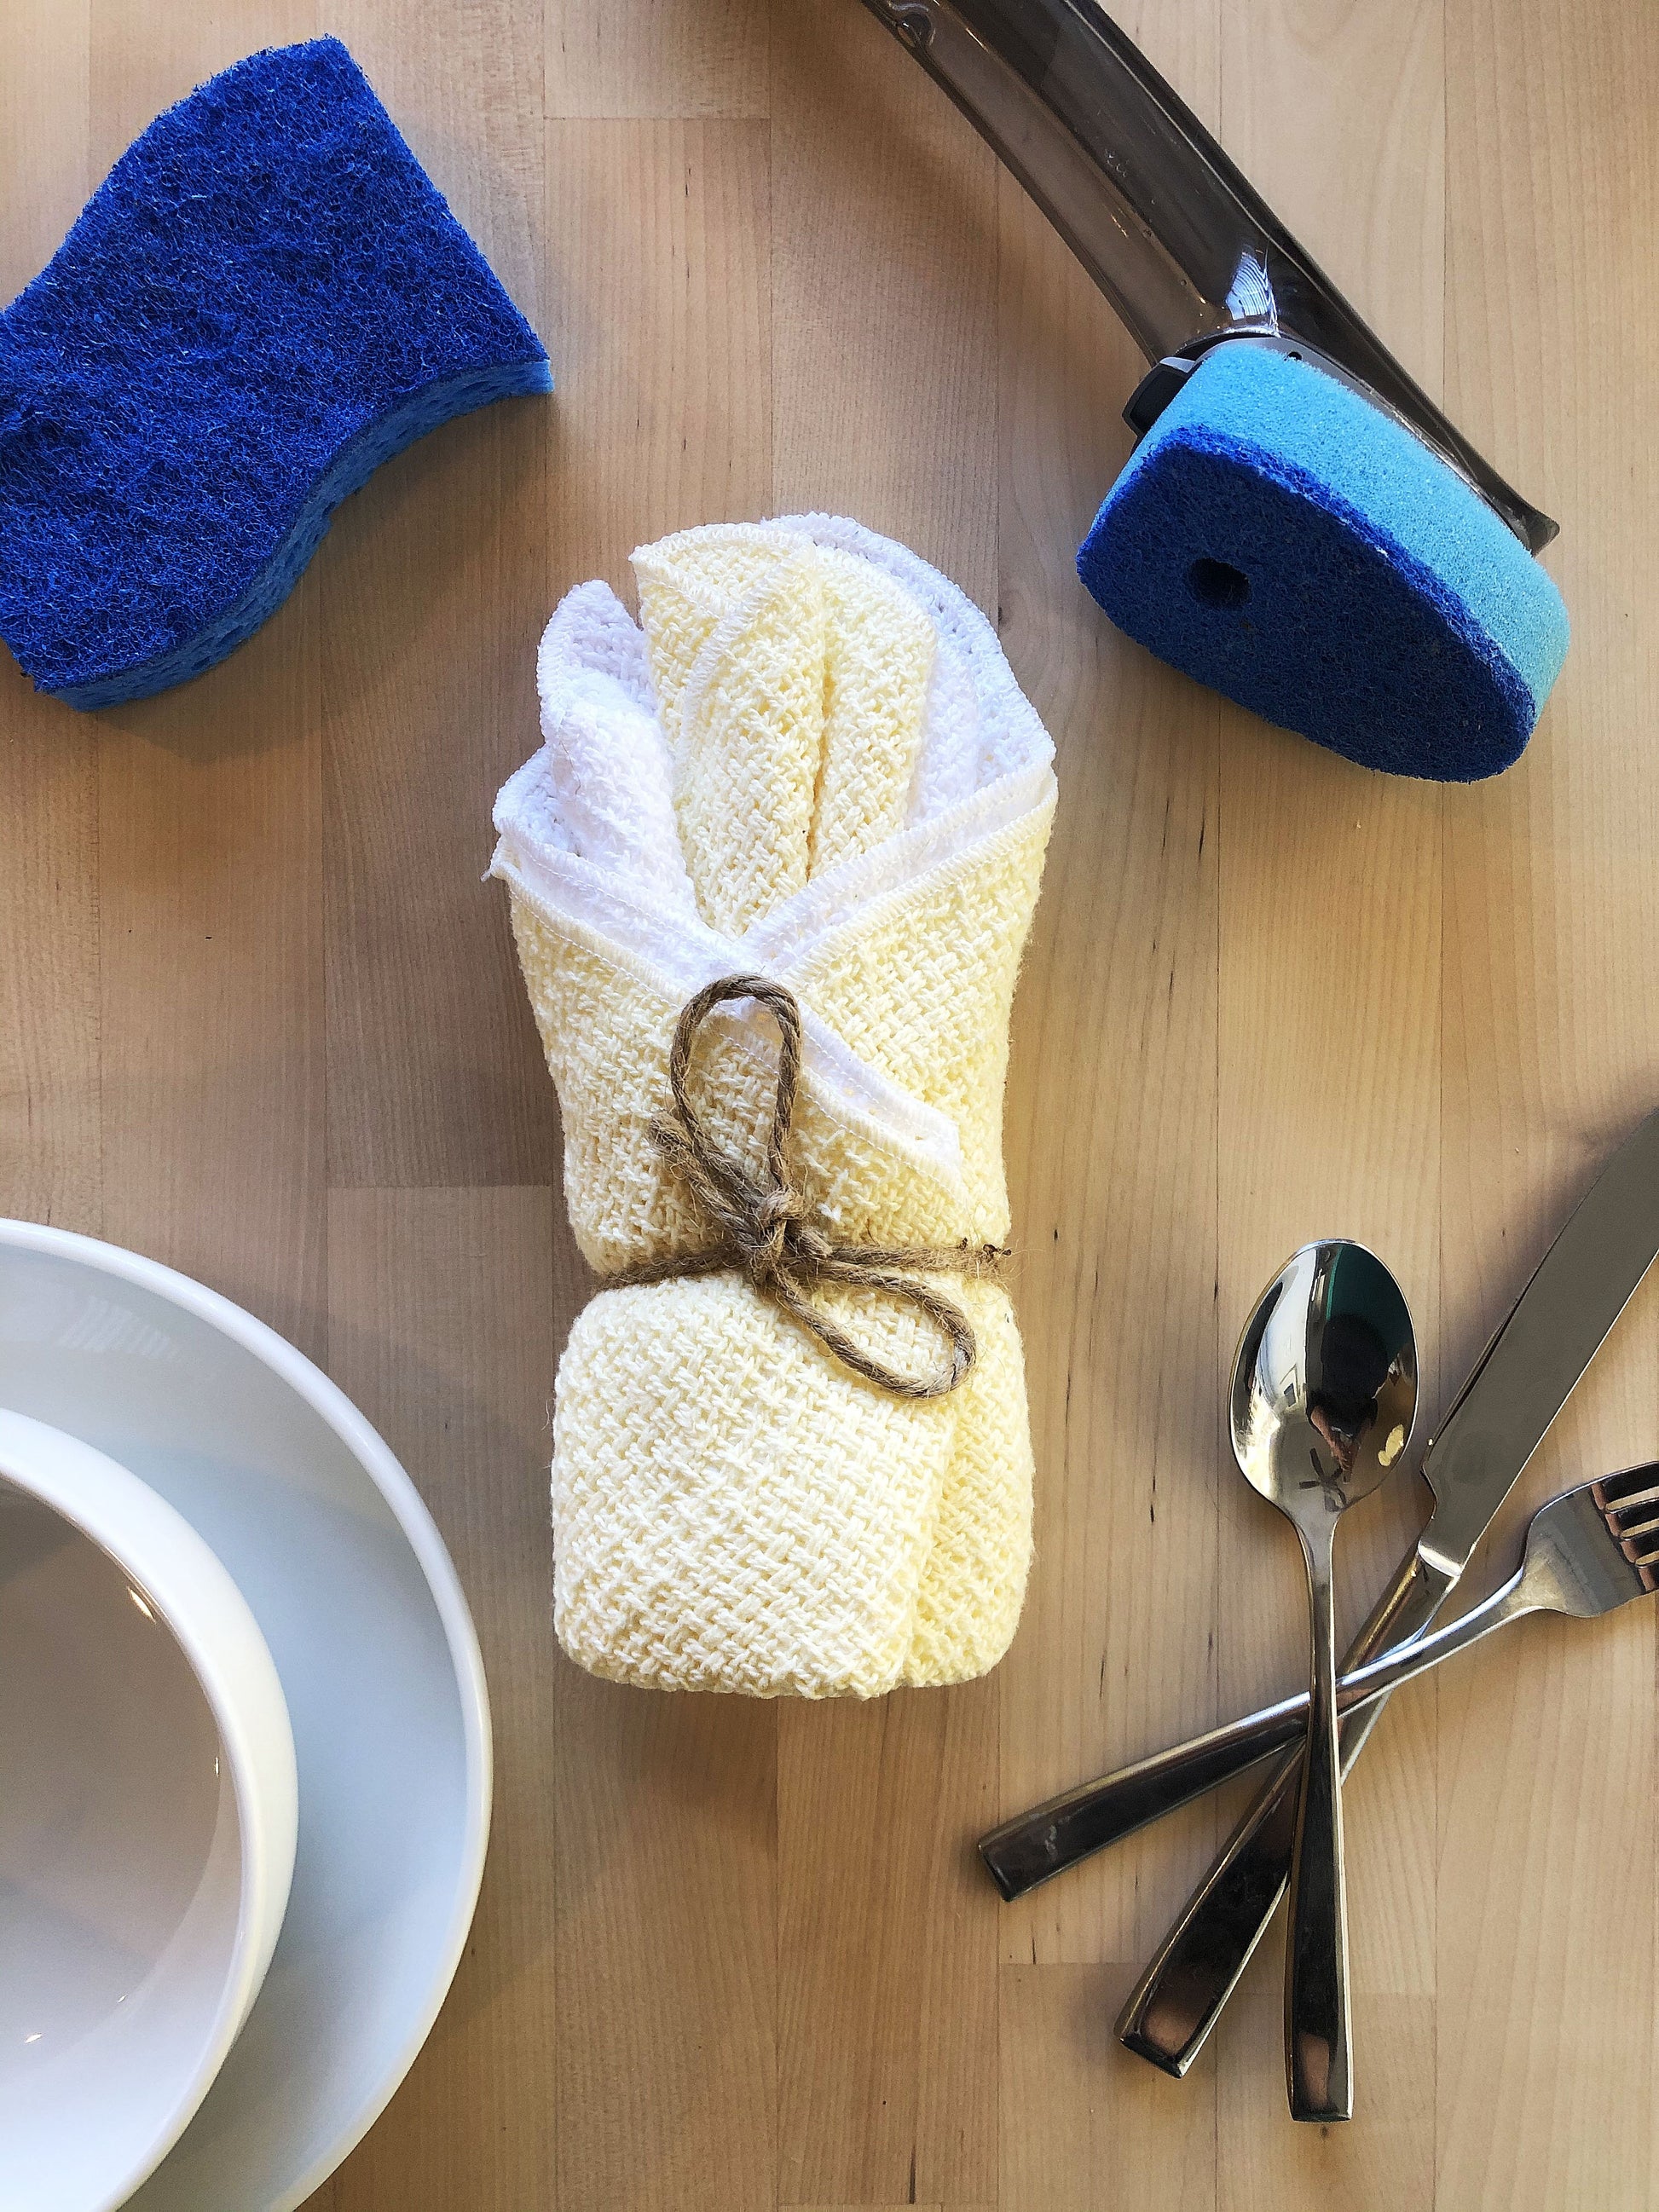 Made in the USA 100% Cotton Dish Towels